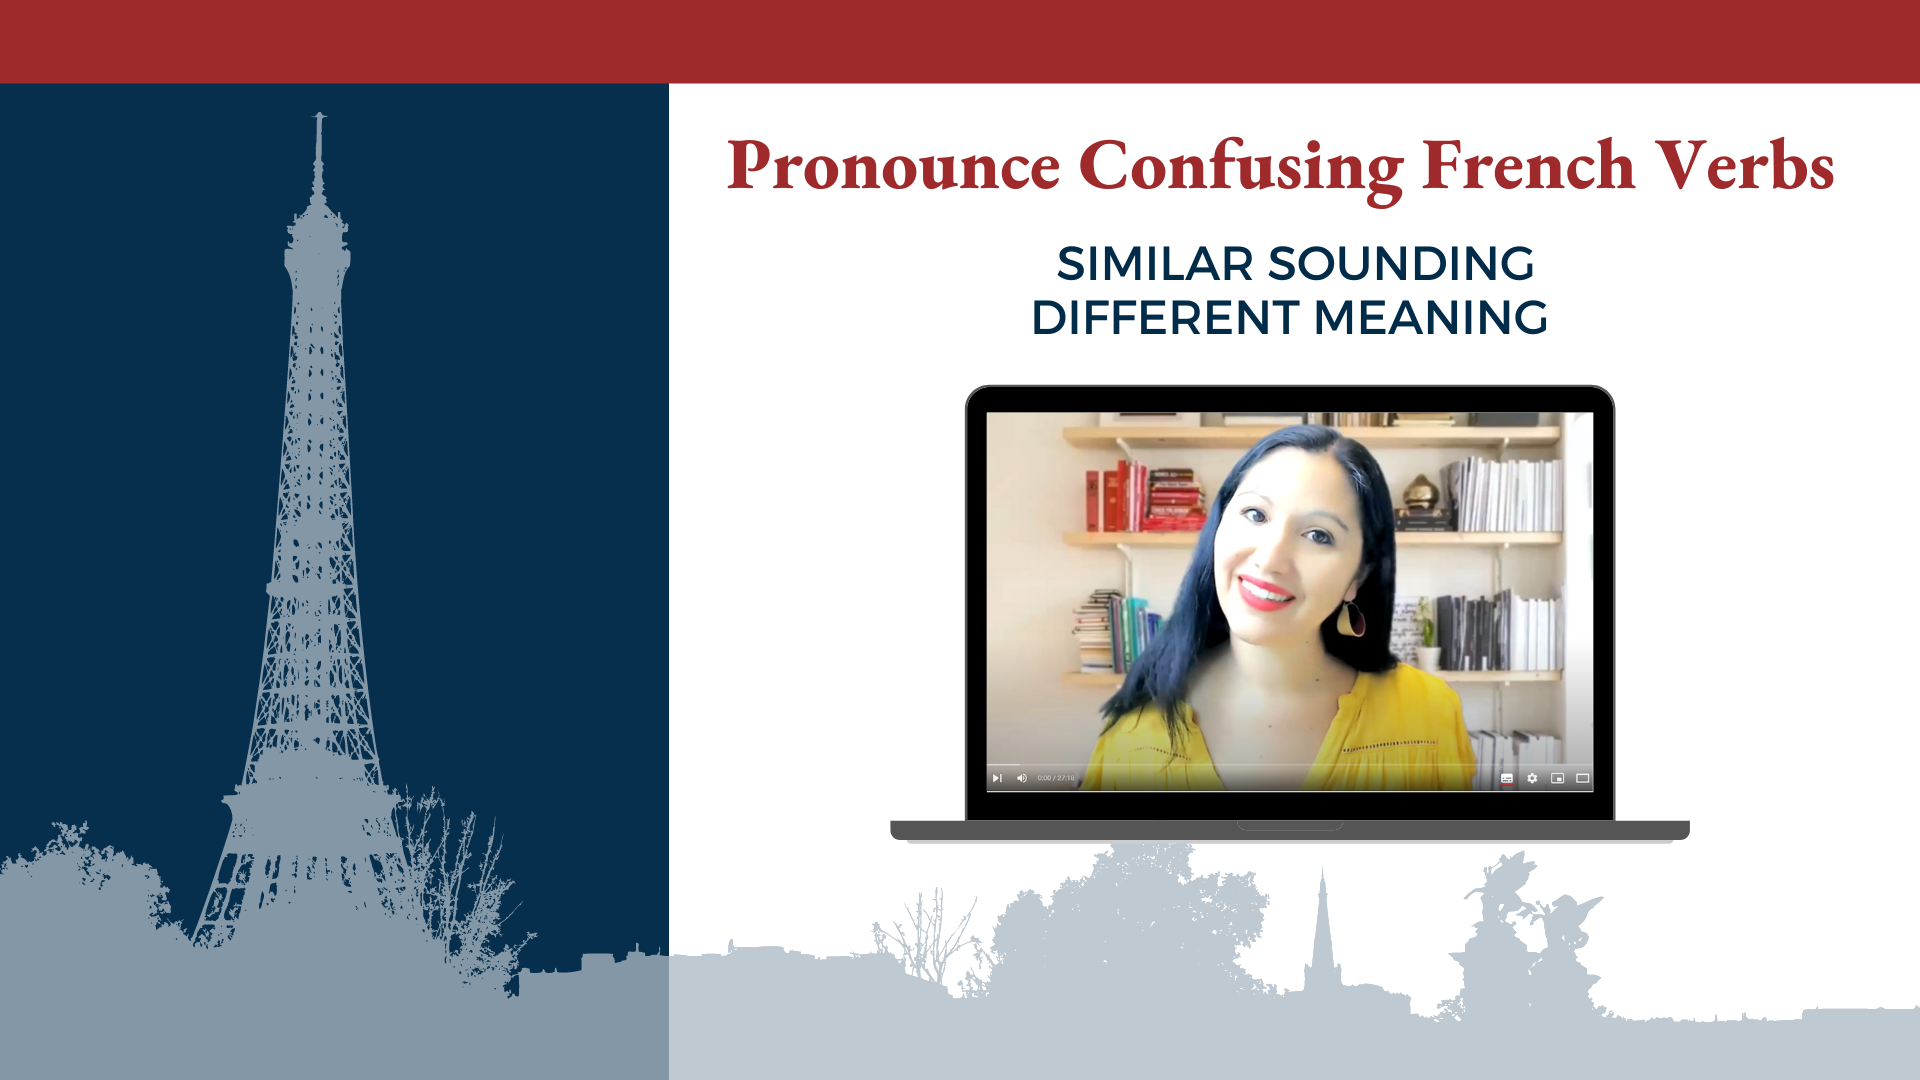 Pronounce Confusing French Verbs